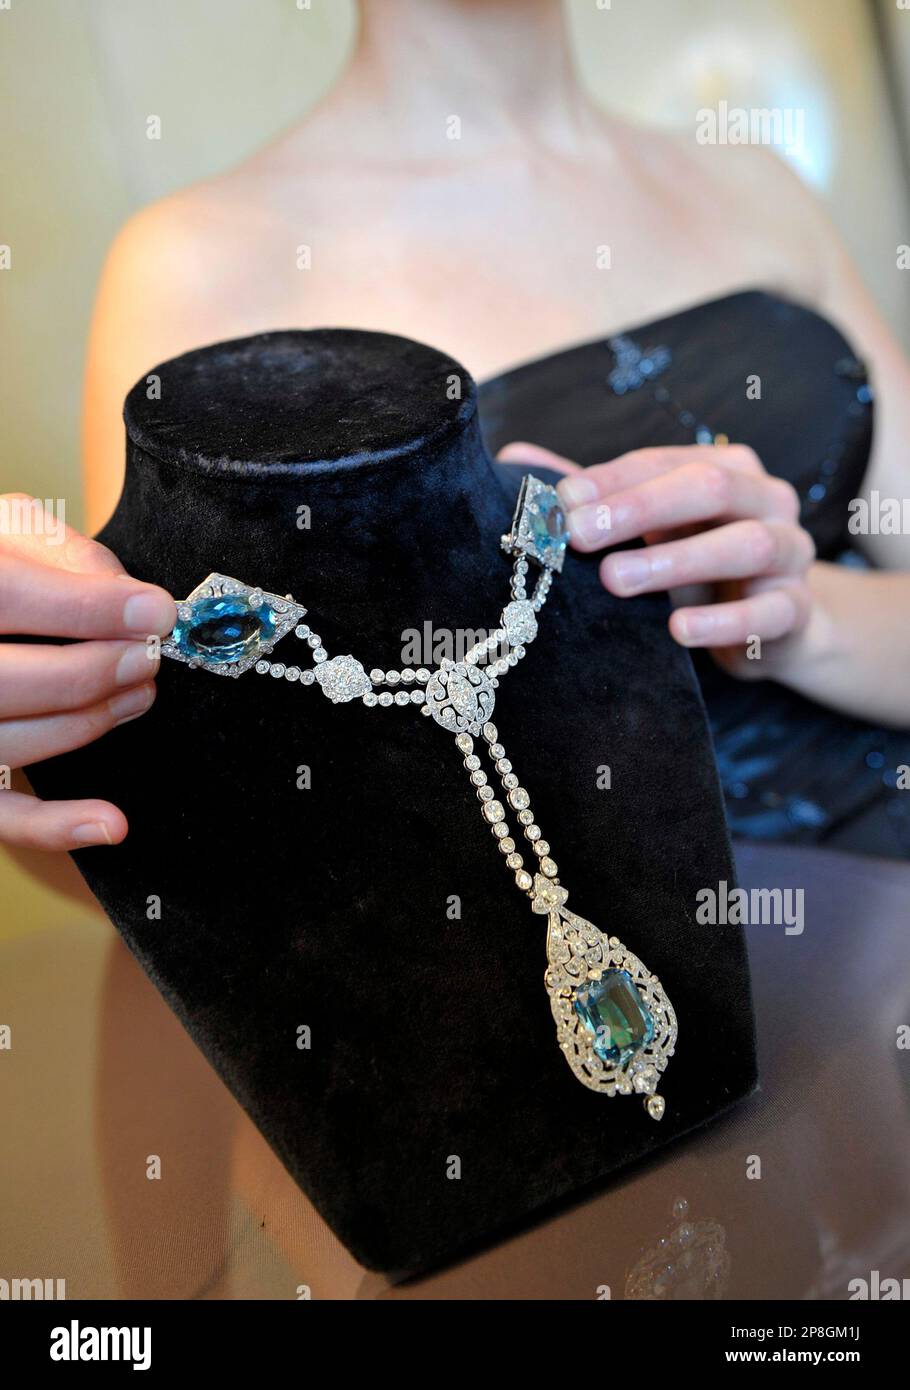 A Sotheby's employee displays a 1912 aquamarine and diamond corsage  ornament by Cartier during a preview at Sotheby's in Geneva, Switzerland,  Wednesday, May 6, 2009. It is estimated to fetch some US$100,000-150,000